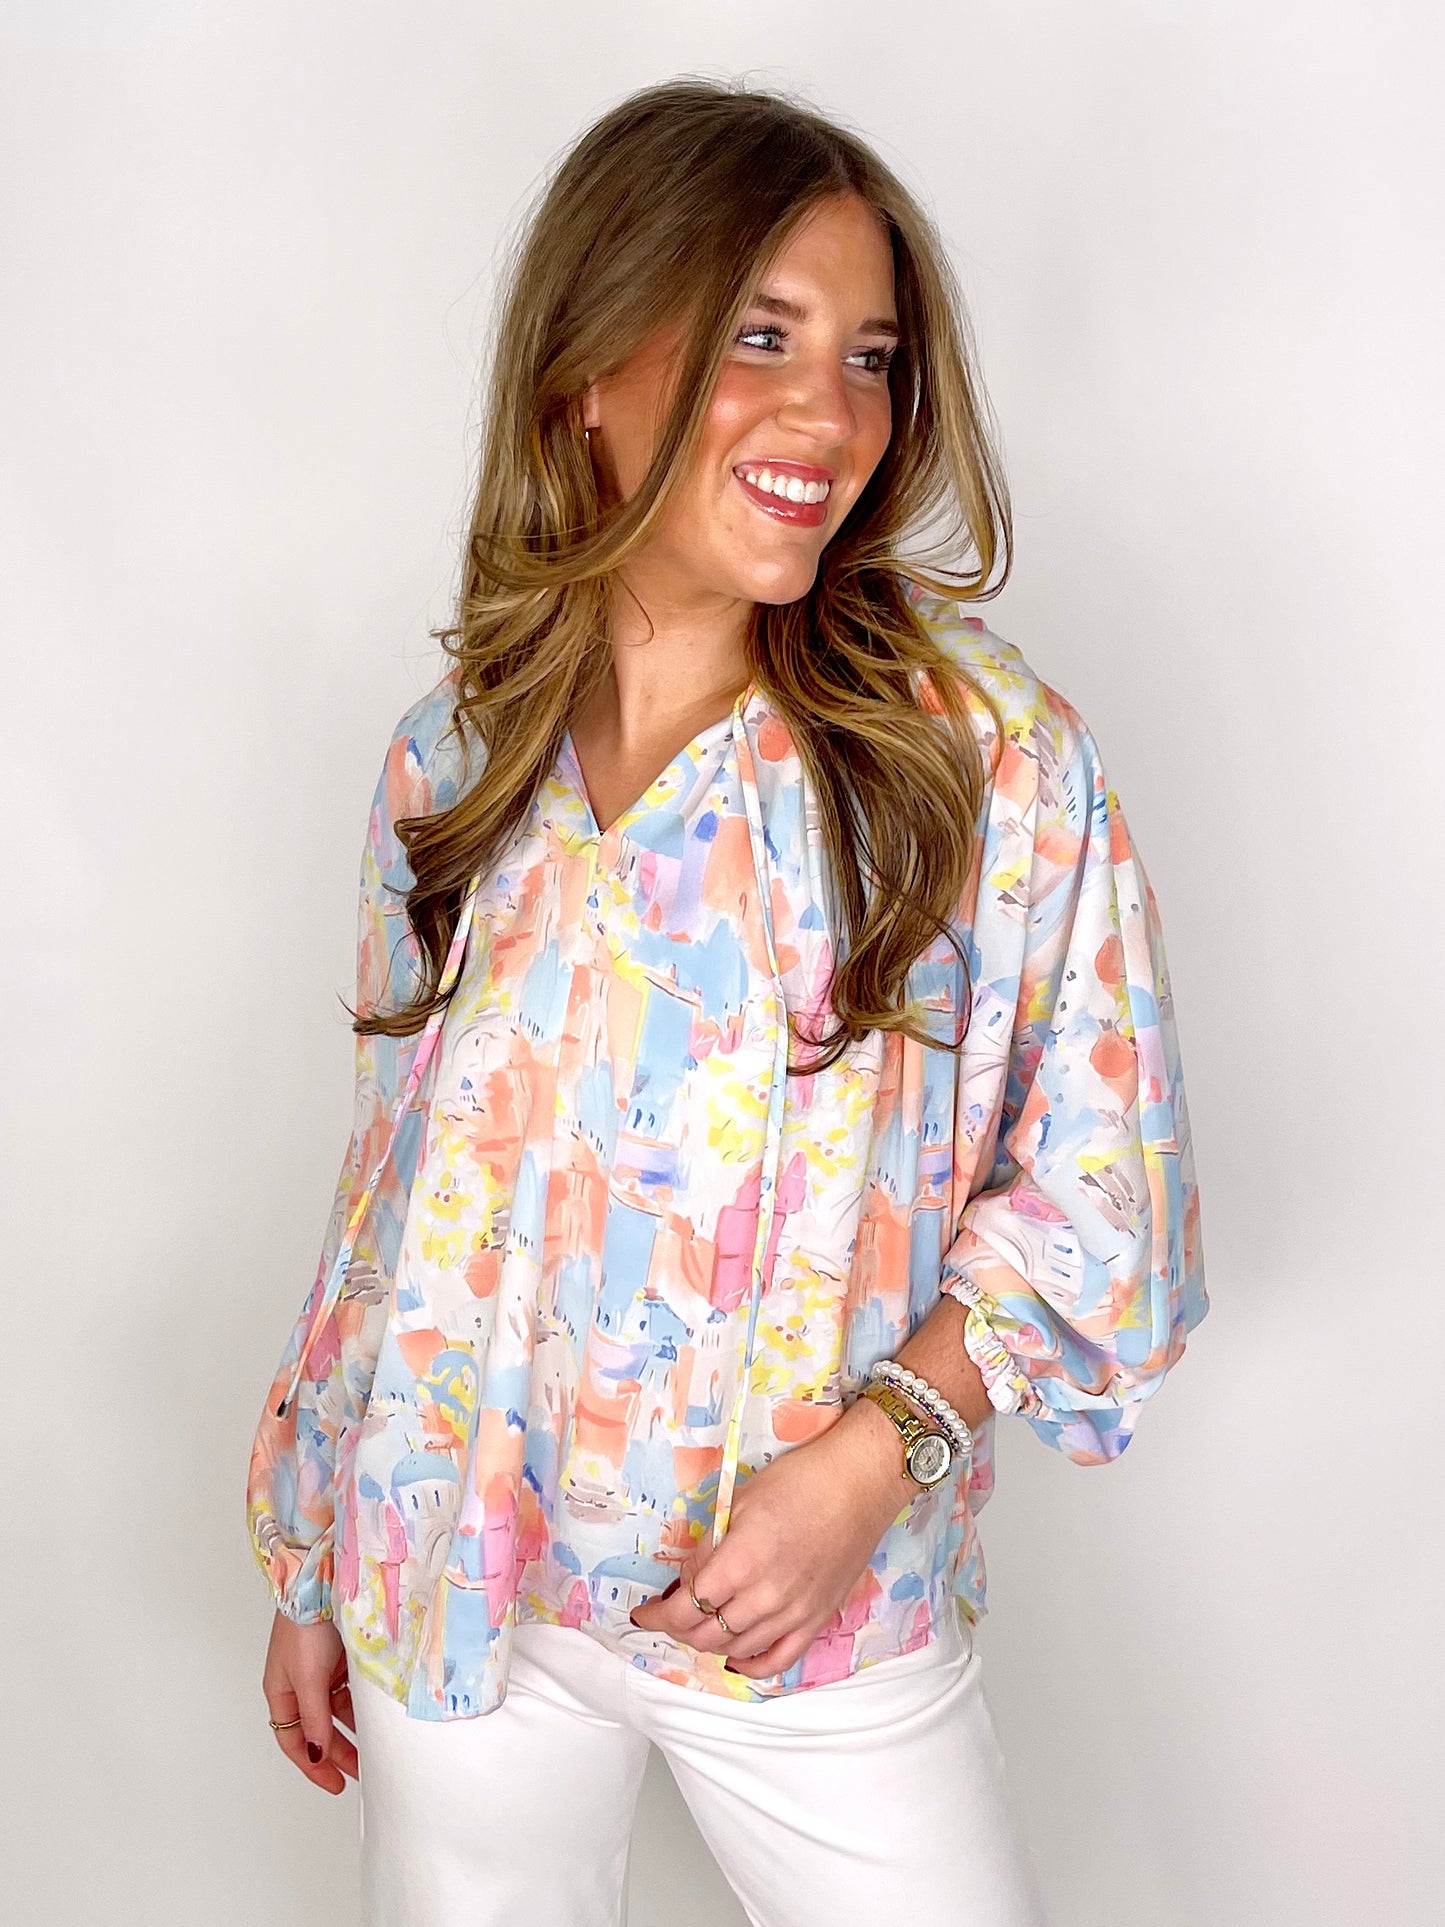 The Santorini Blouse-Blouse-Entro-The Village Shoppe, Women’s Fashion Boutique, Shop Online and In Store - Located in Muscle Shoals, AL.